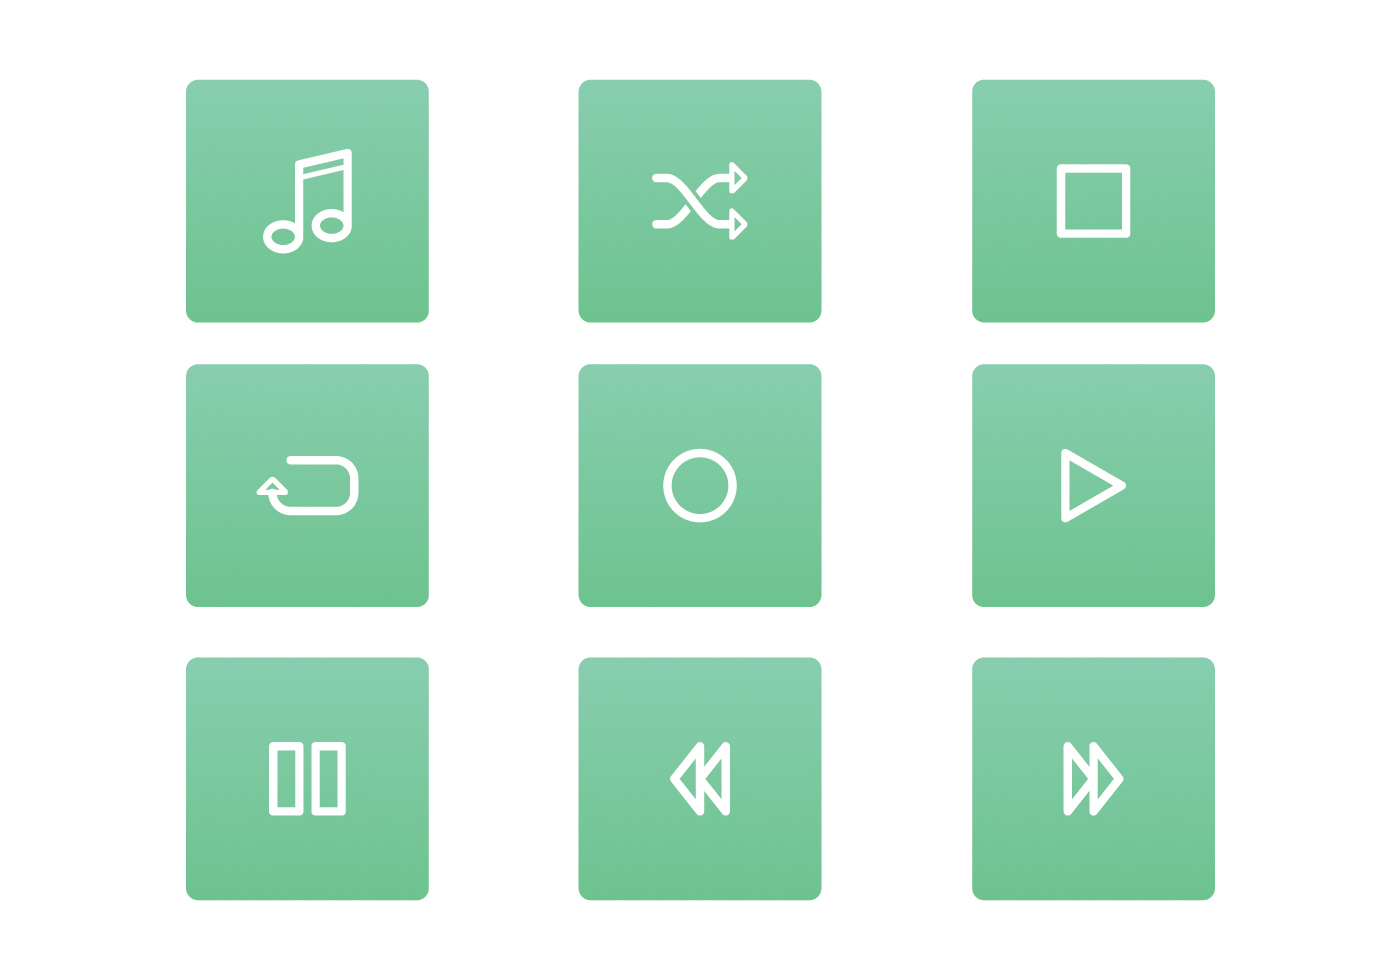 FREE MUSIC PLAYER ICON SET VECTOR - Download Free Vector Art, Stock Graphics & Images